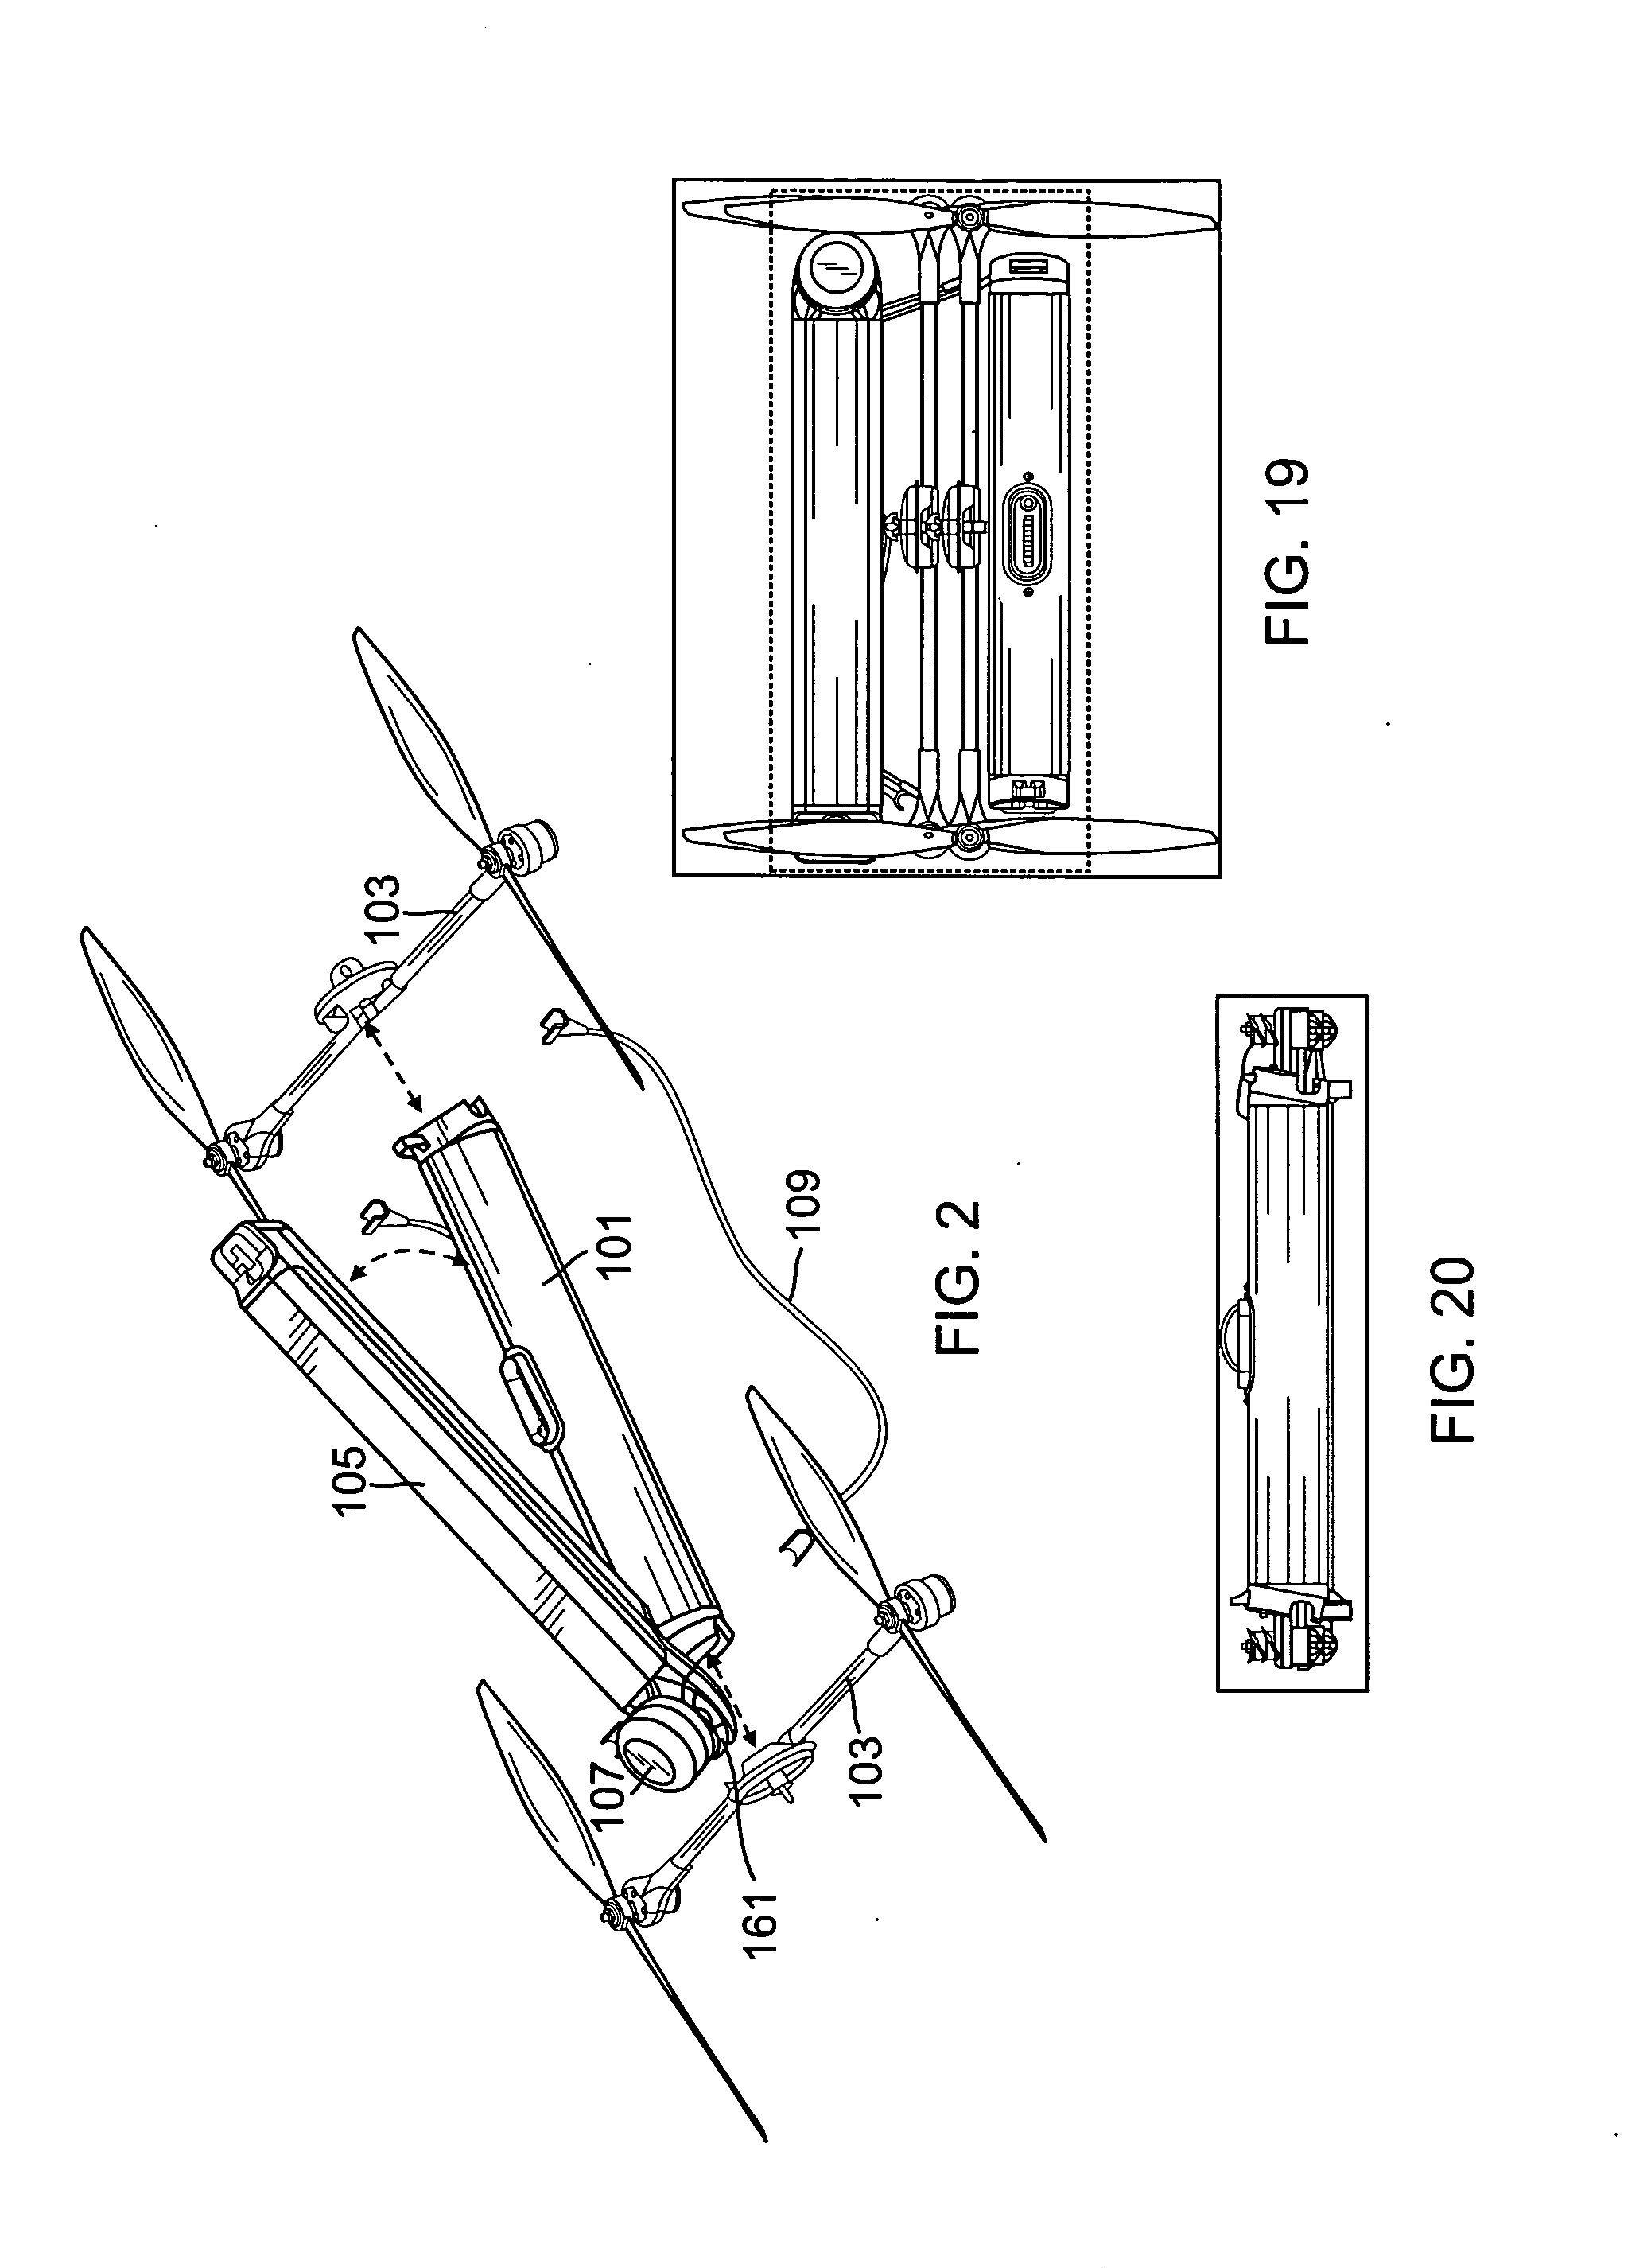 Reconfigurable battery-operated vehicle system